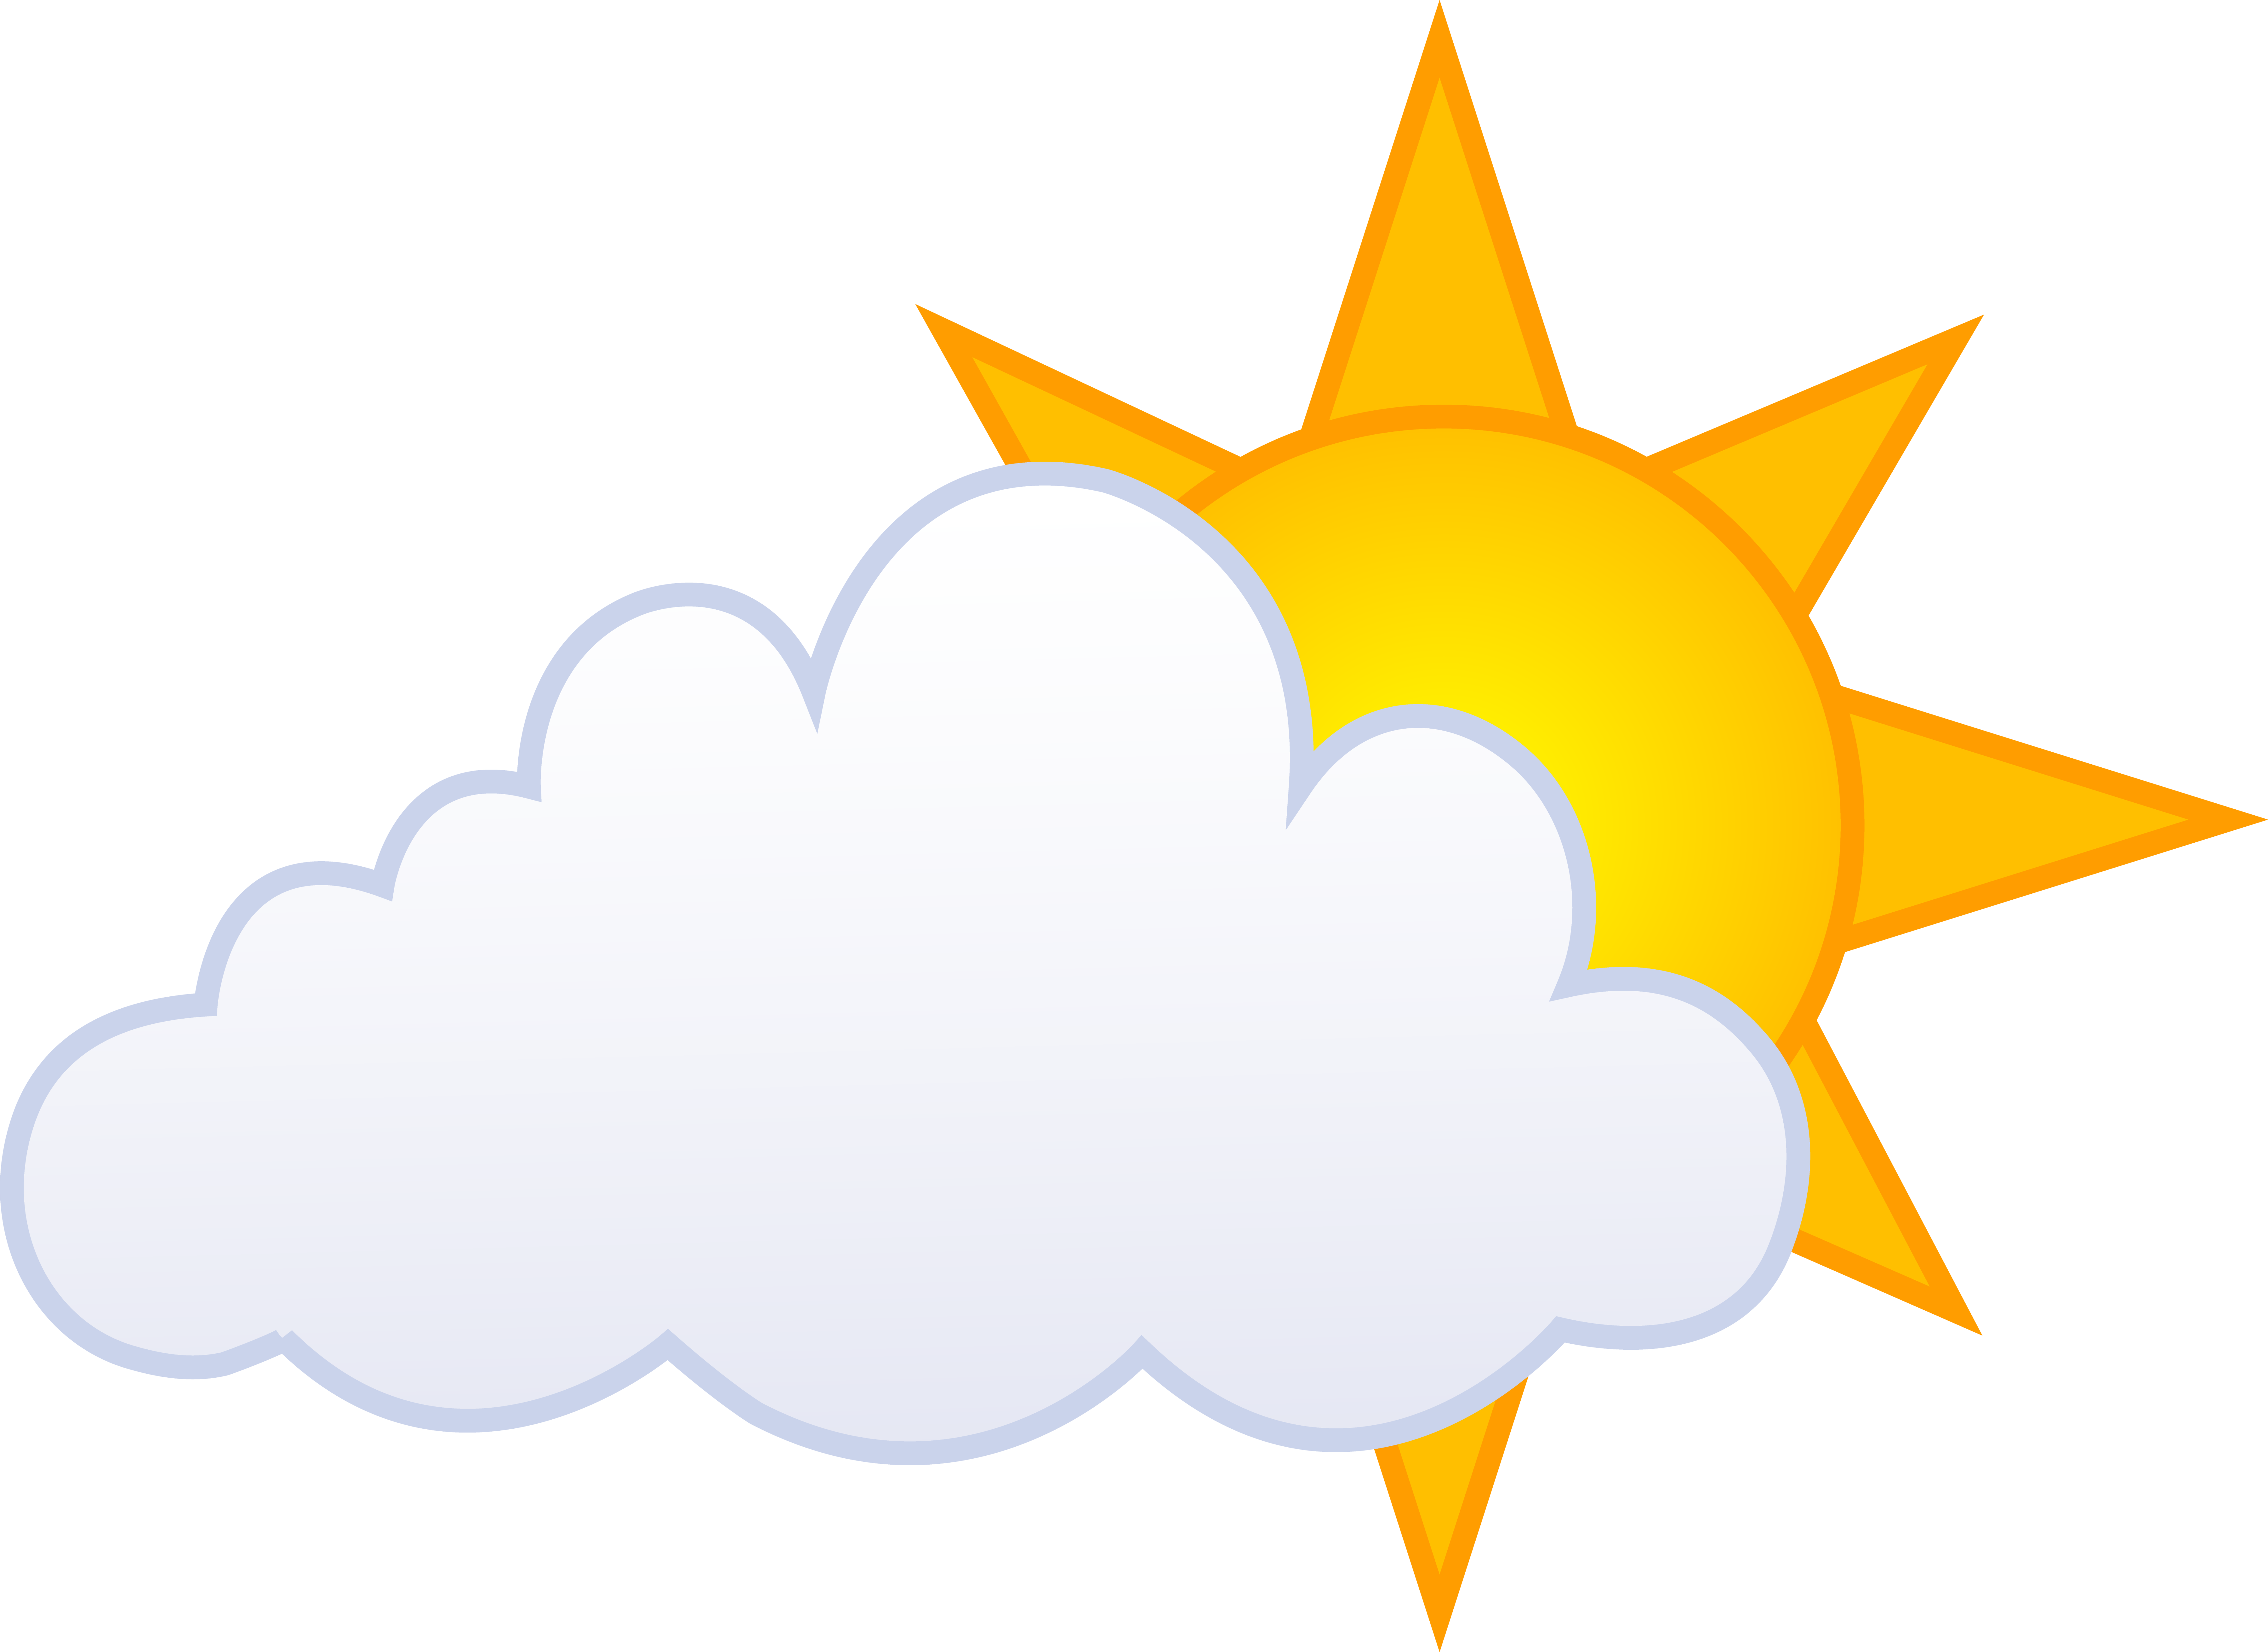 Partly cloudy weather clip art. 